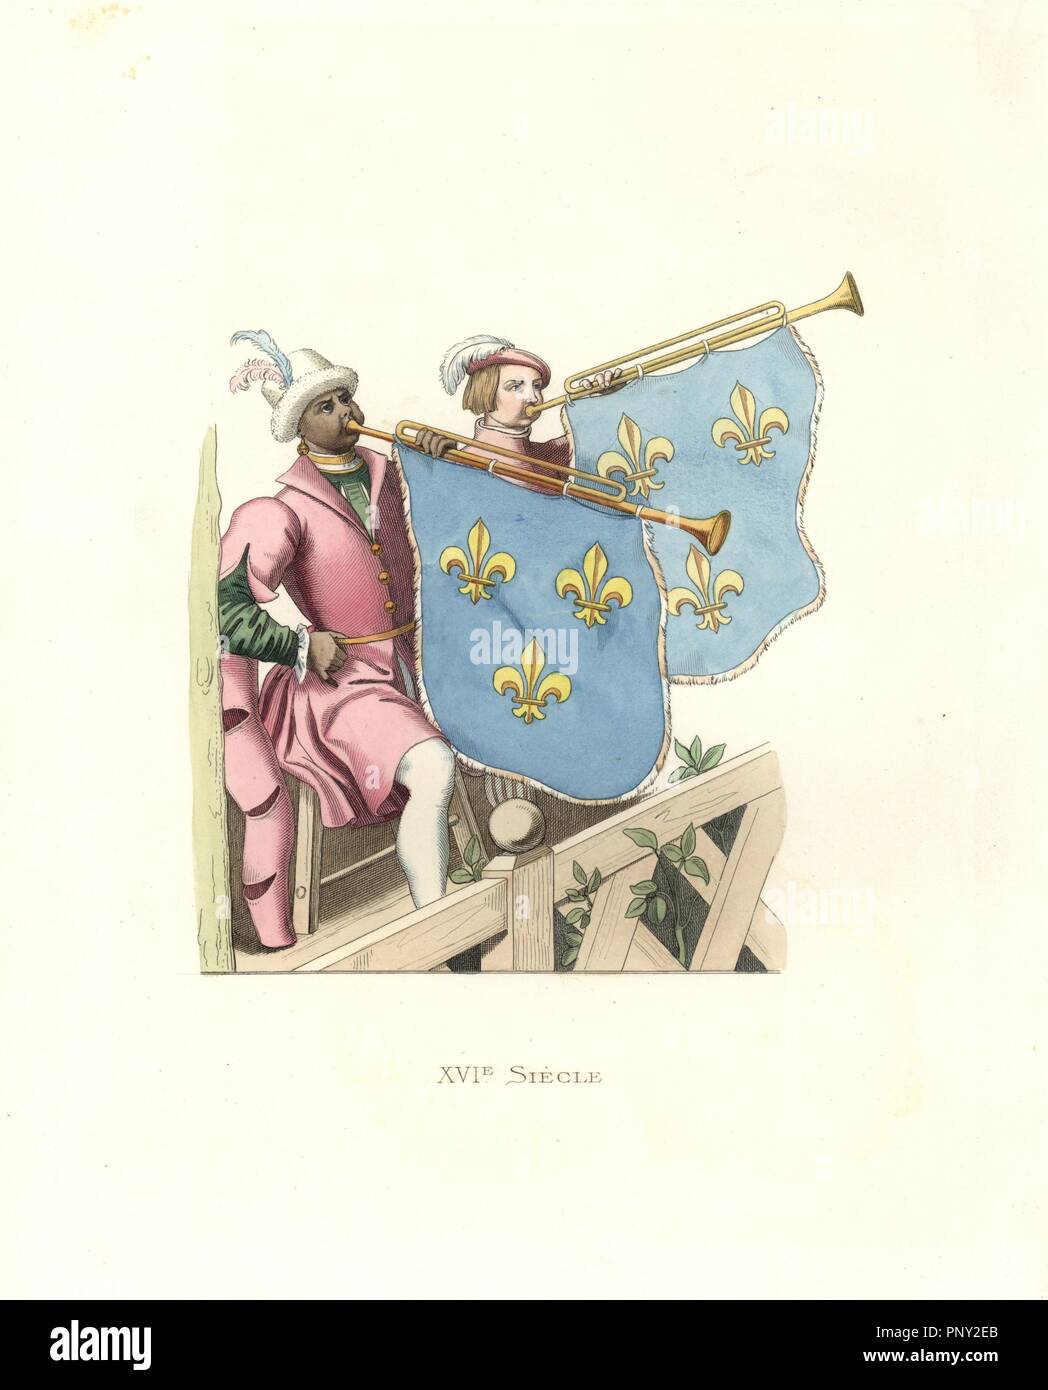 Trumpeters at a tournament, reign of Francis I of France. Long-sleeved pink tunics over green doublets, white stockings, horns bearing blue standards decorated with gold fleur-de-lys. One of the musicians an African.. . Handcolored illustration by E. Lechevallier-Chevignard, lithographed by A. Didier, L. Flameng, F. Laguillermie, from Georges Duplessis's 'Costumes historiques des XVIe, XVIIe et XVIIIe siecles' (Historical costumes of the 16th, 17th and 18th centuries), Paris 1867. The book was a continuation of the series on the costumes of the 12th to 15th centuries published by Camille Bonna Stock Photo